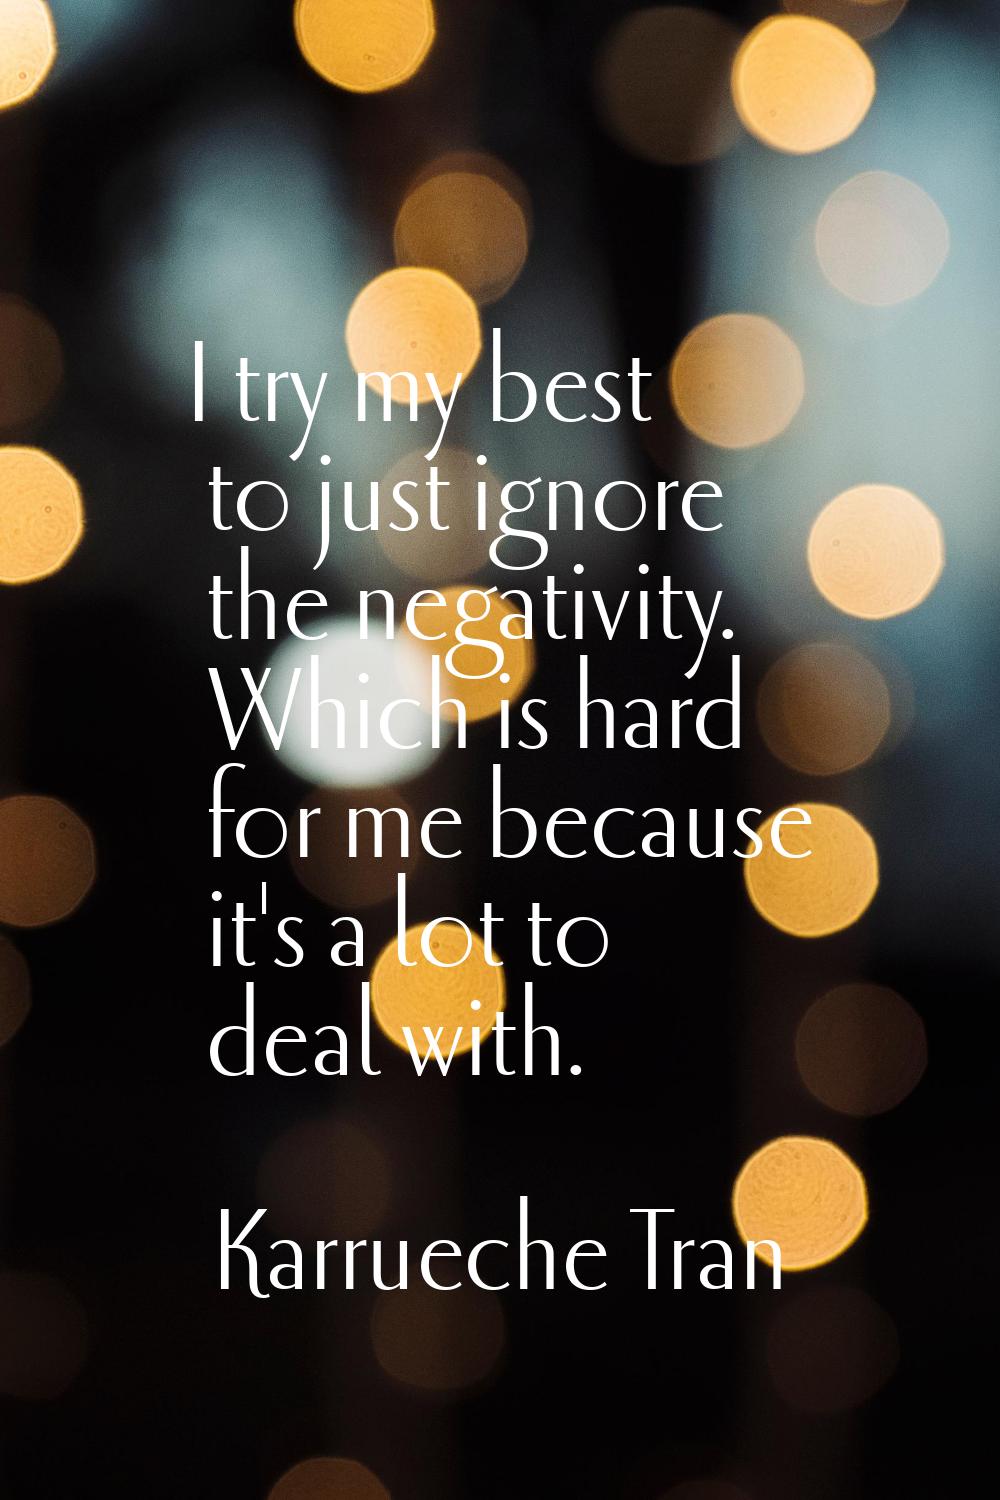 I try my best to just ignore the negativity. Which is hard for me because it's a lot to deal with.